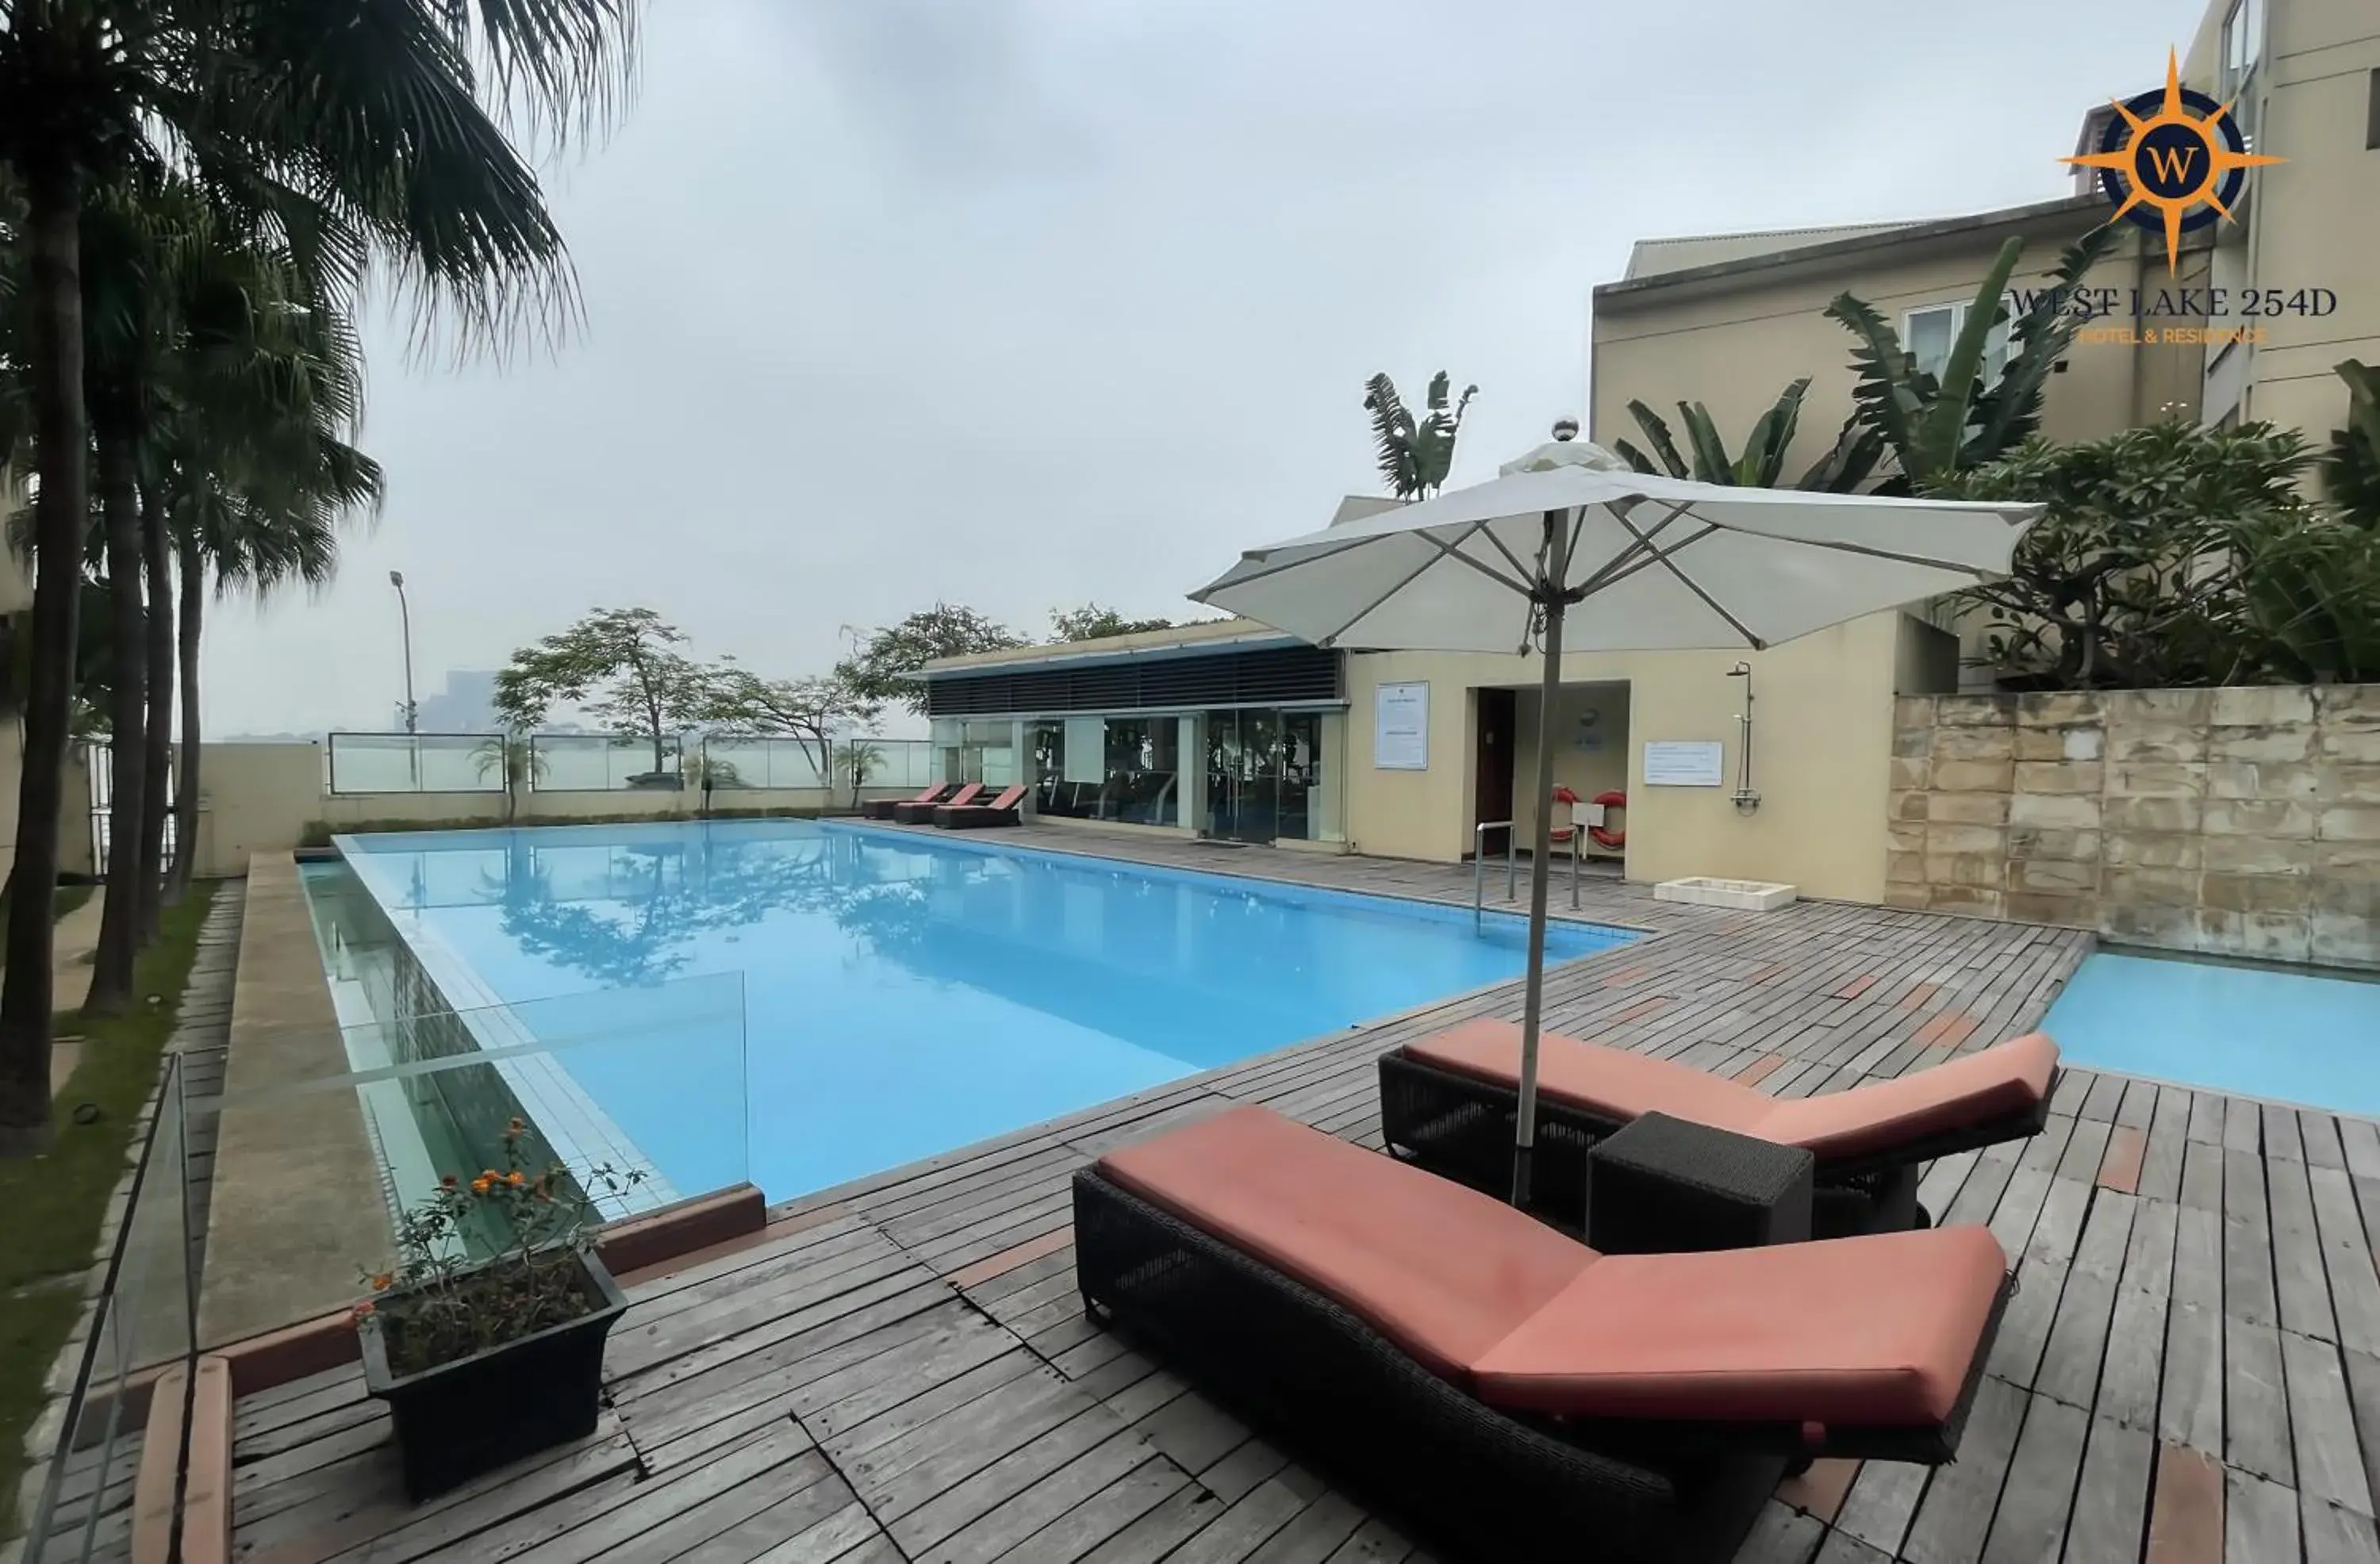 Swimming Pool in West Lake 254D Hotel & Residence